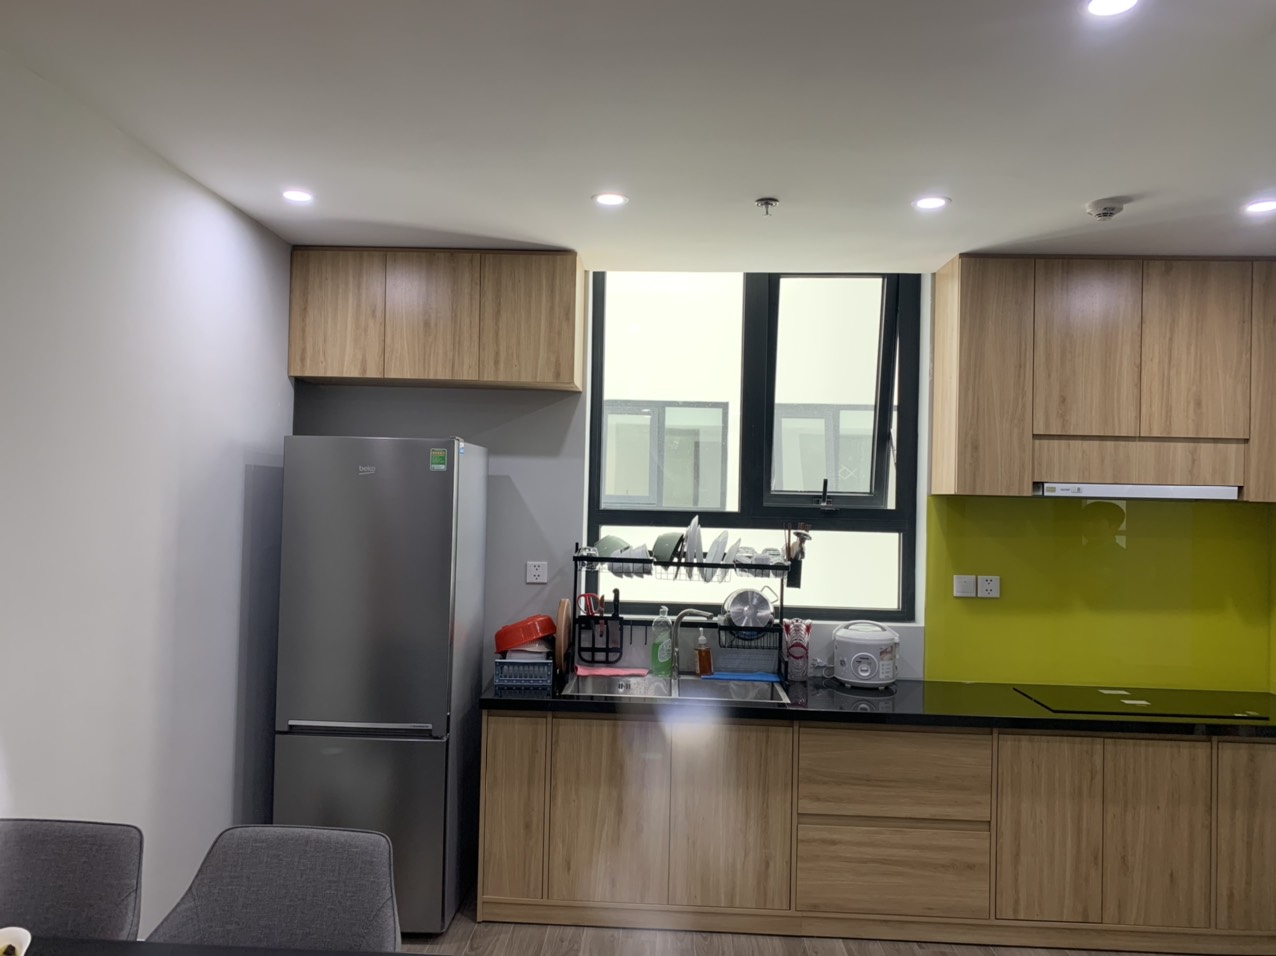 Hud Building apartment for rent | One bedroom | 8 million